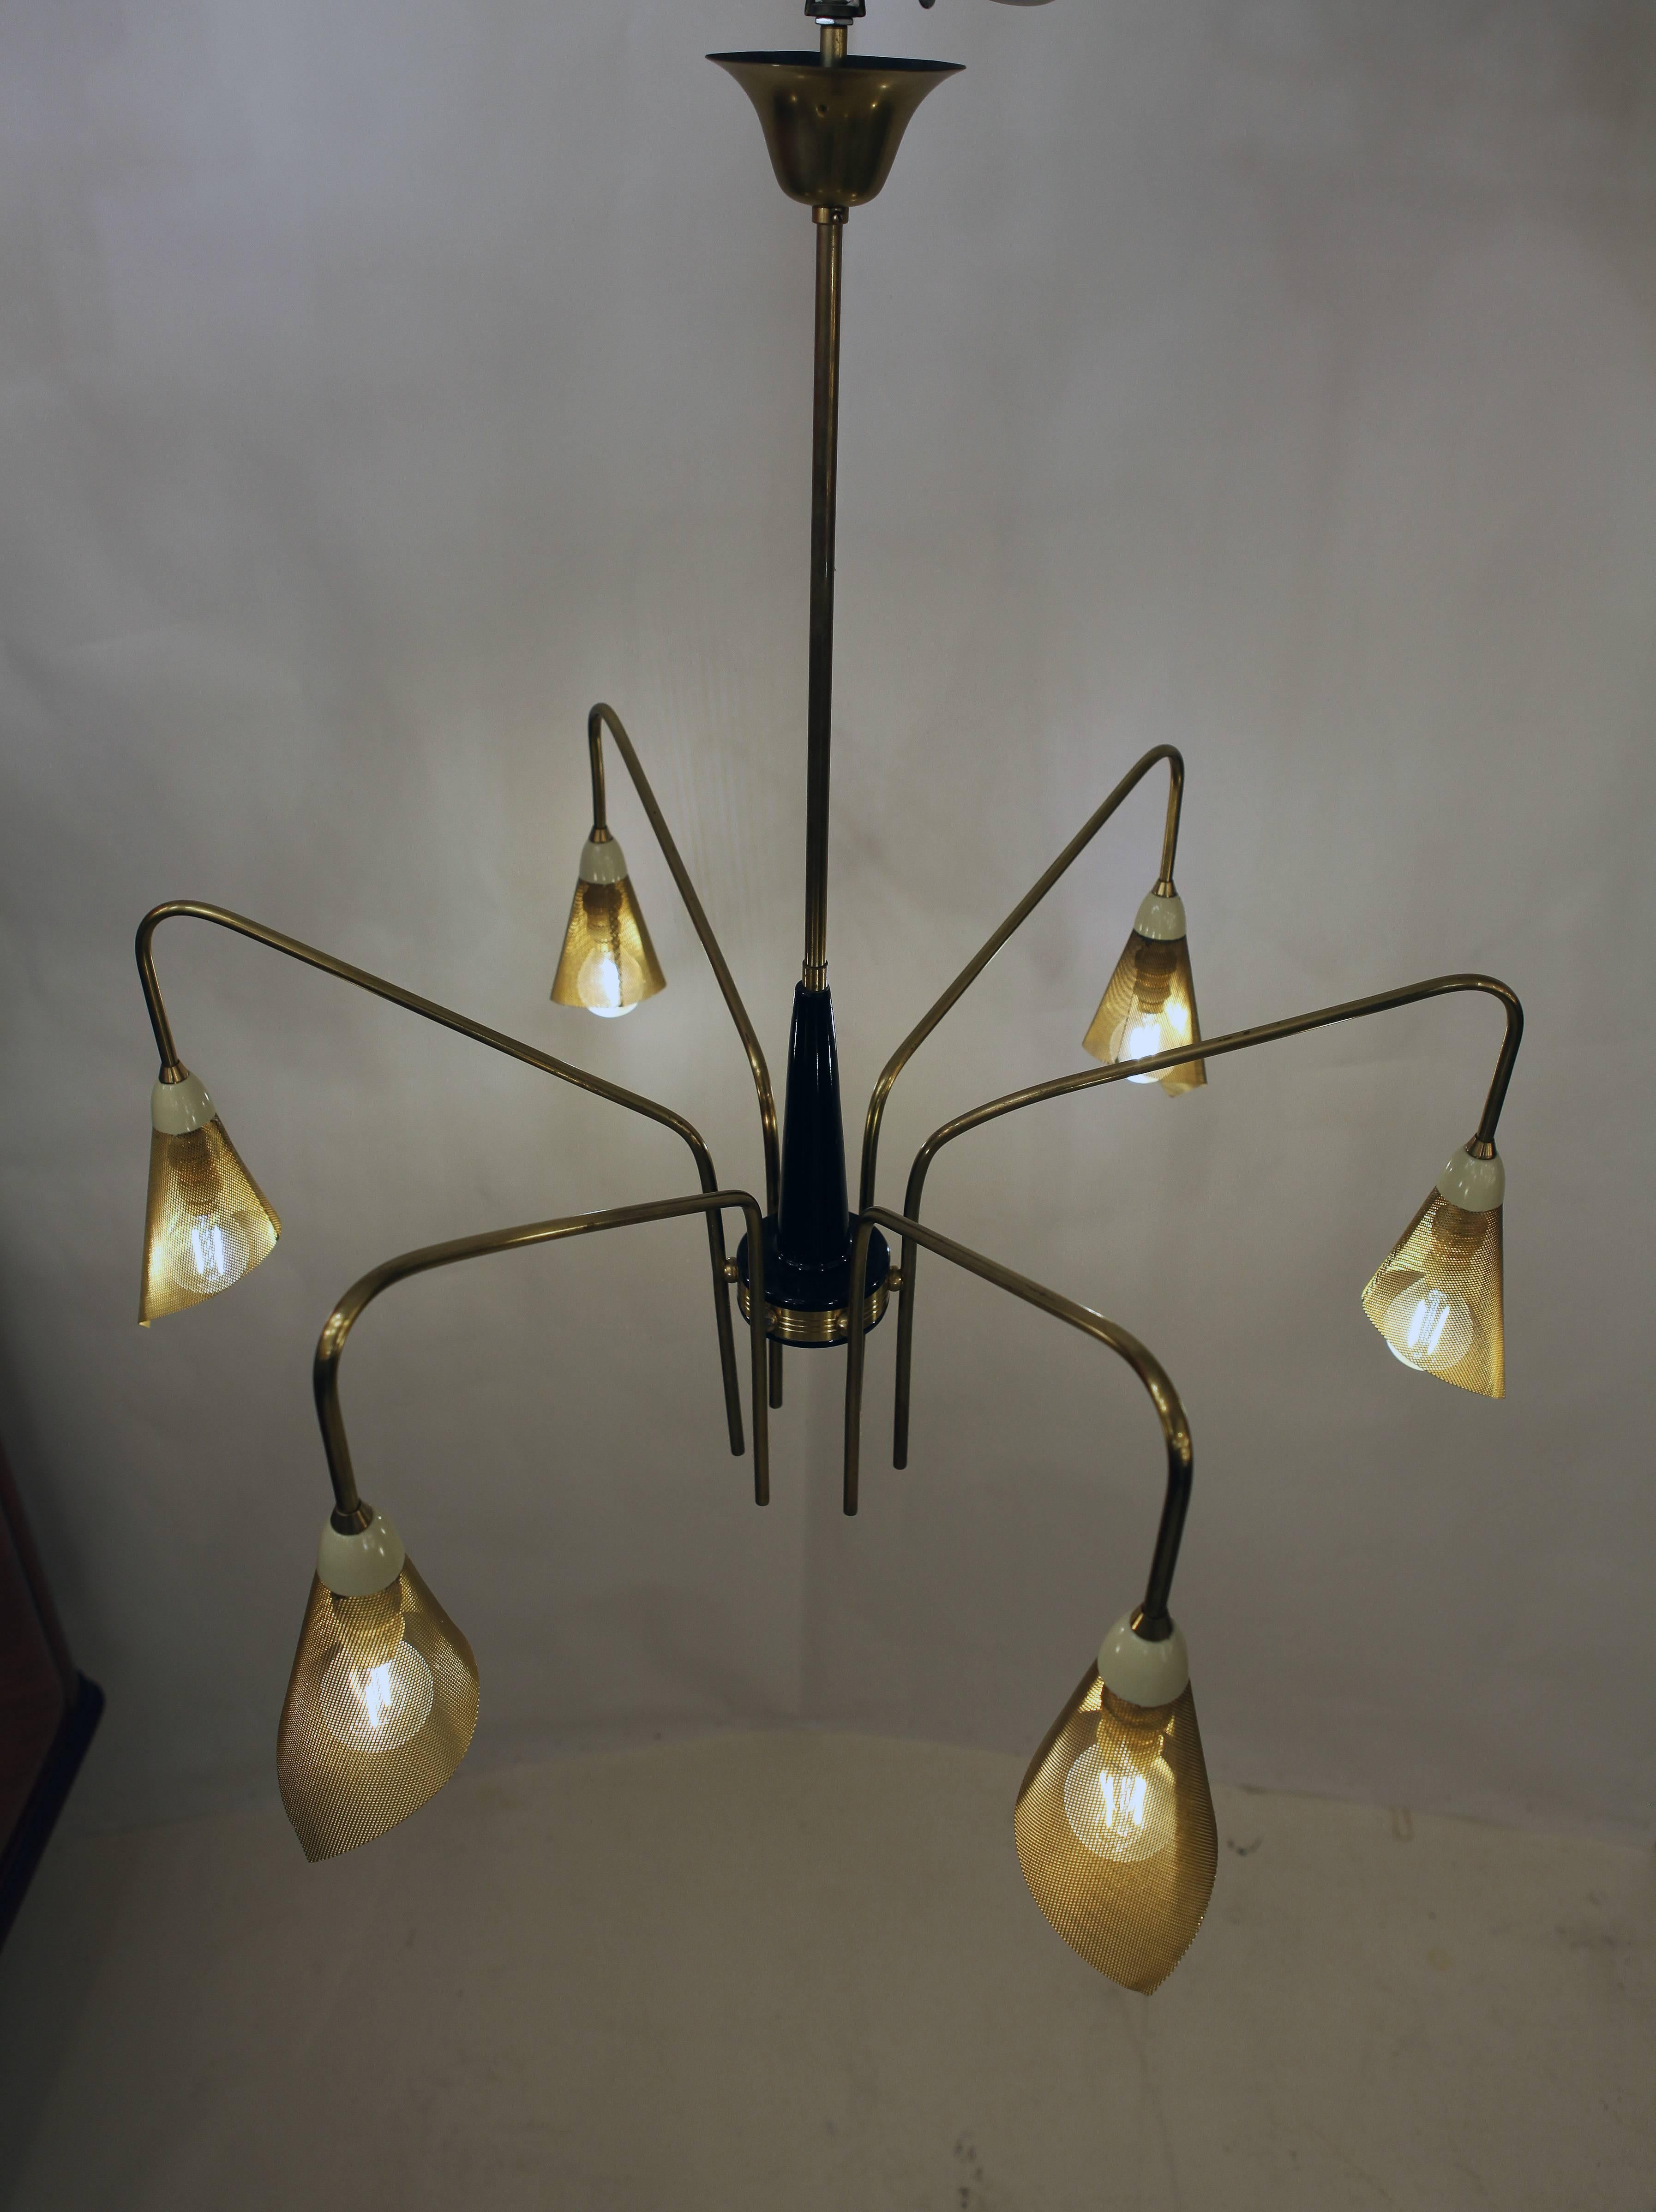 An Italian chandelier in brass with five arms, the shades are in mesh metal which diffuses the lights.